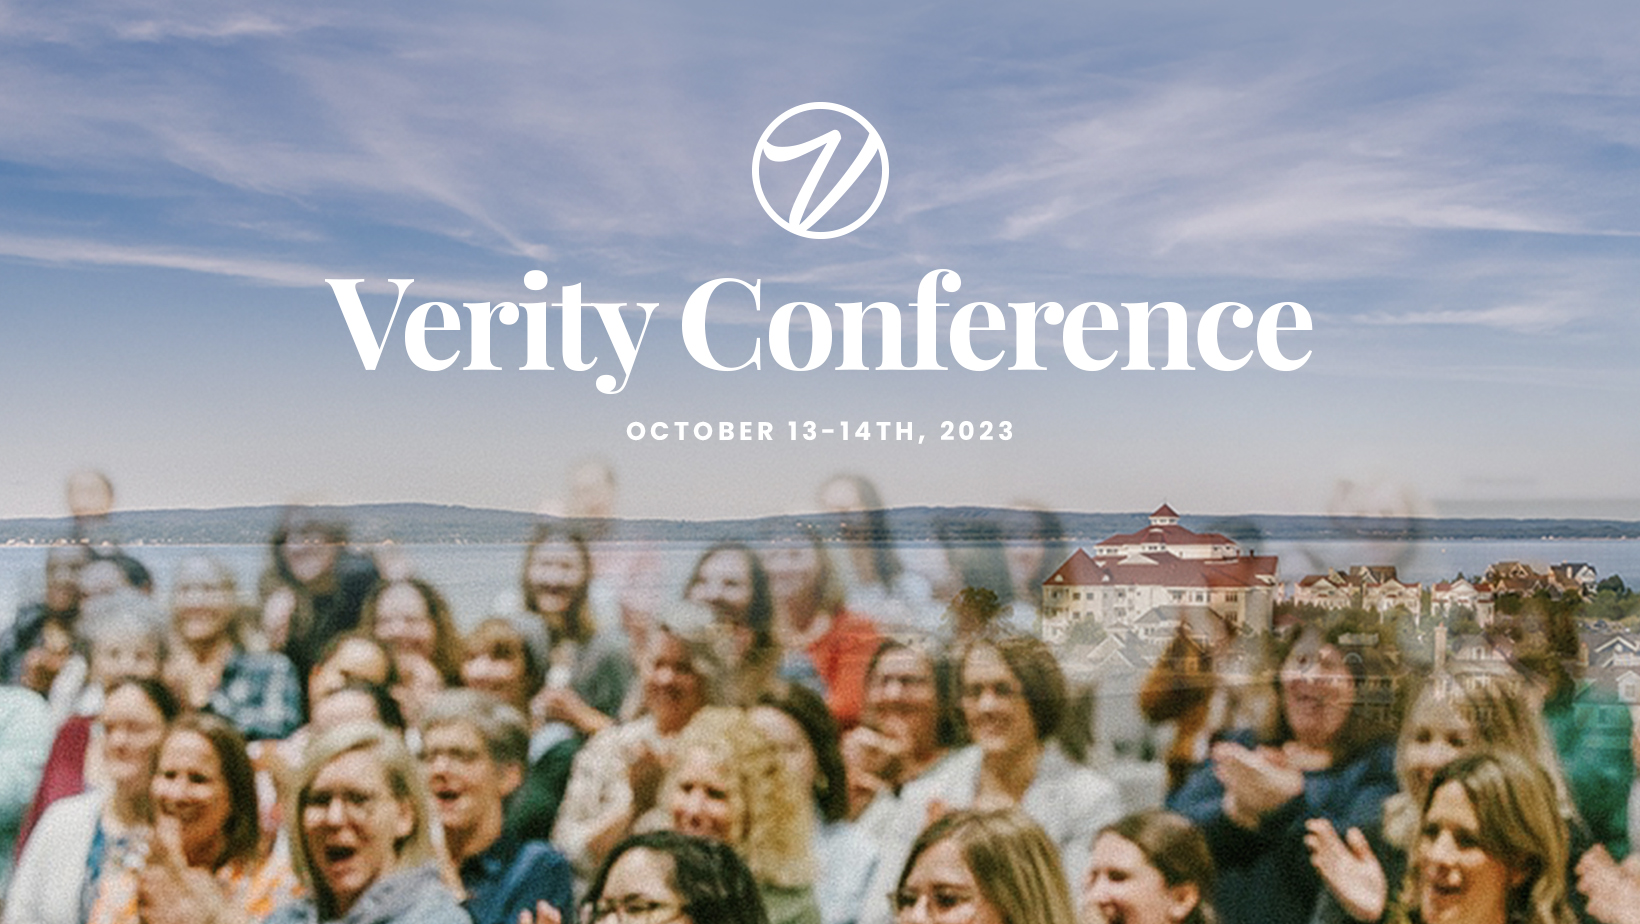 Verity Conference